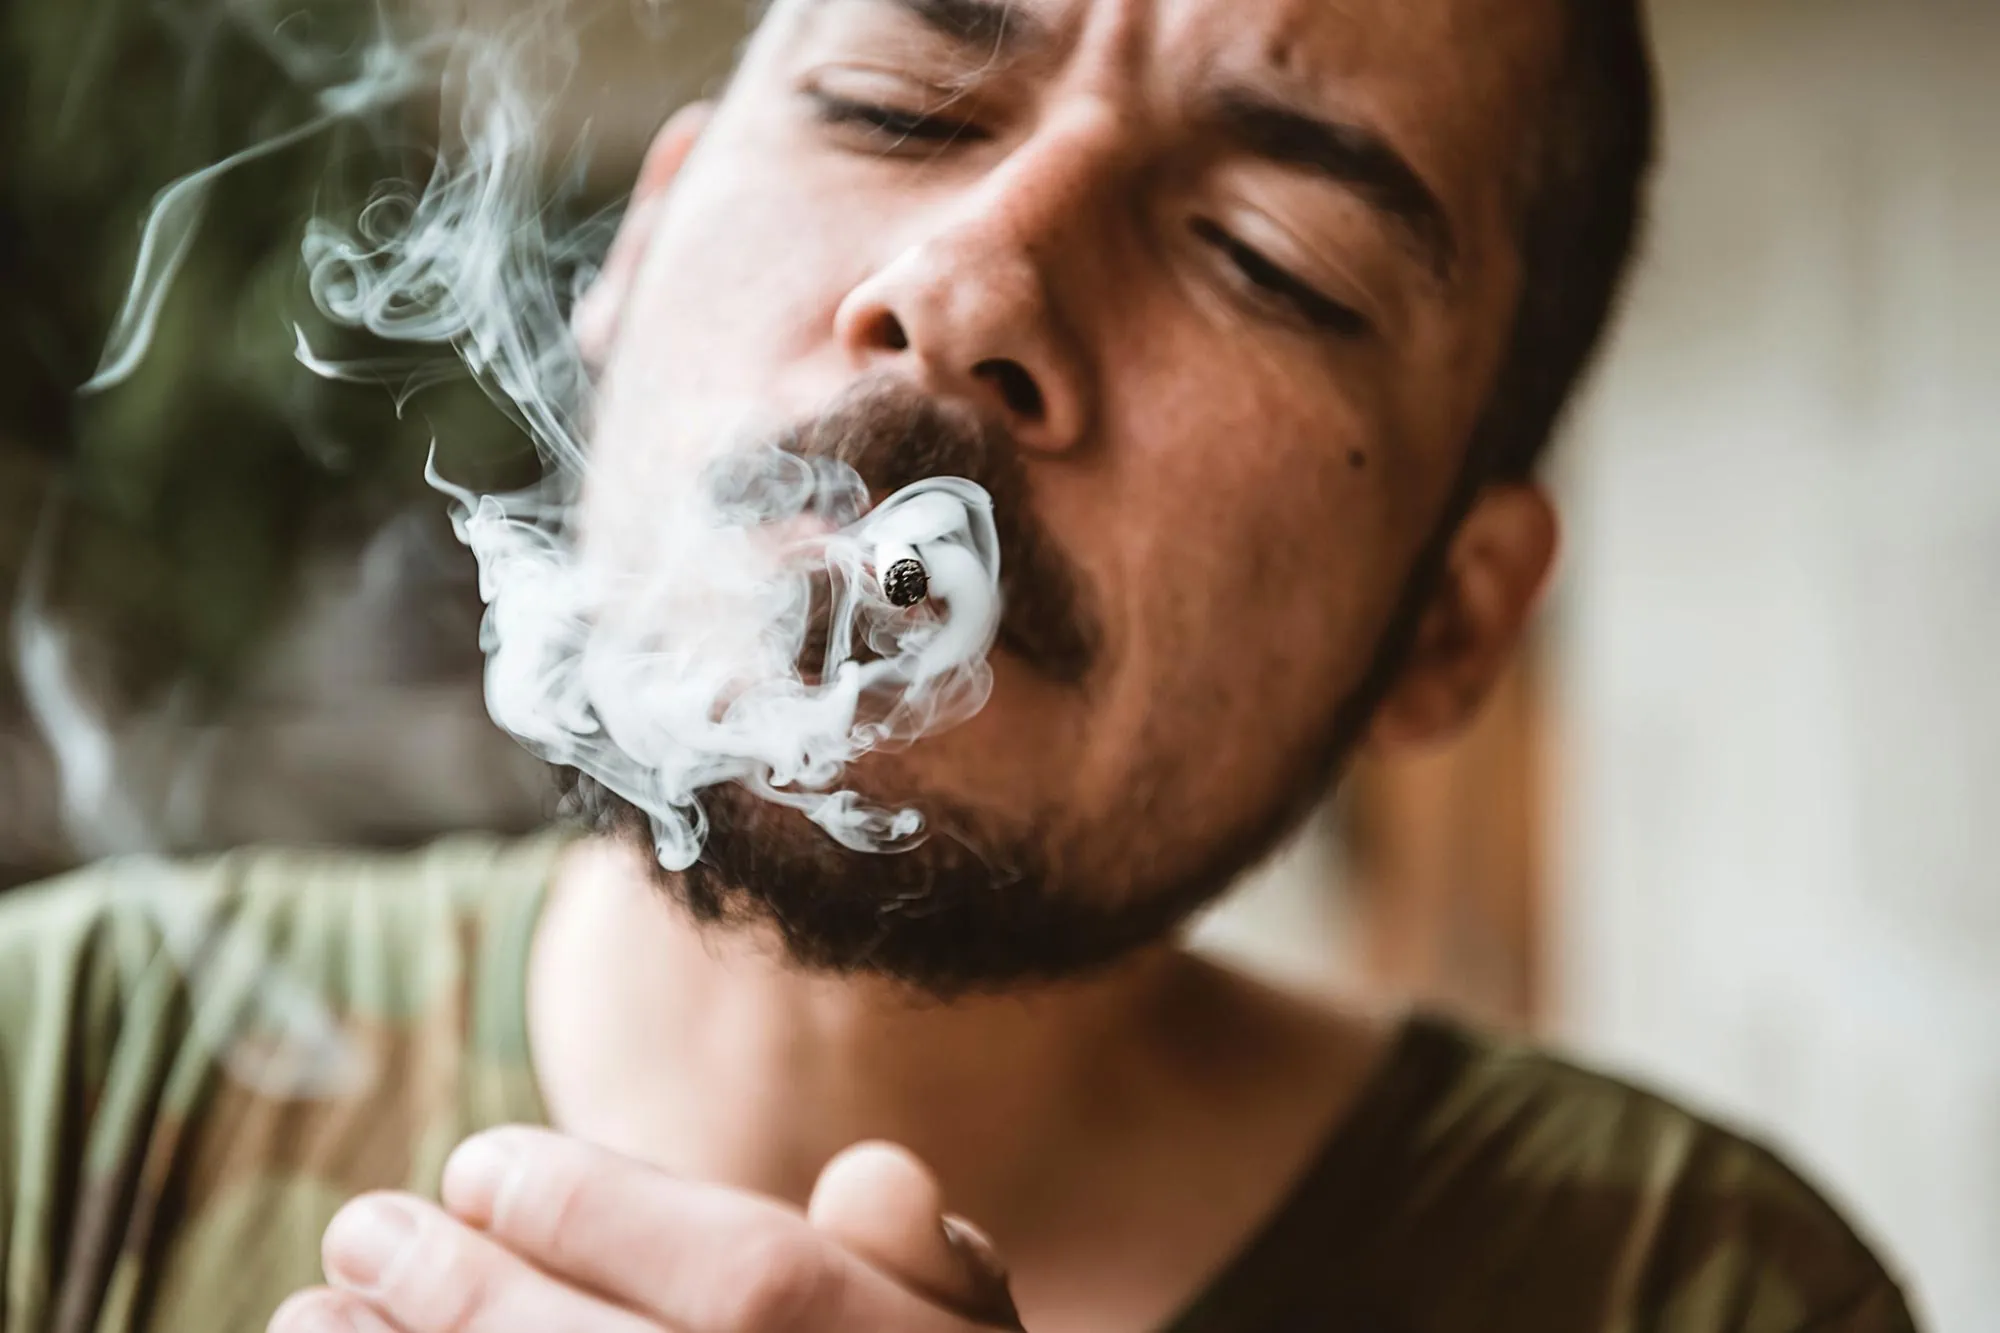 The city with the highest weed consumption in New Mexico is Albuquerque